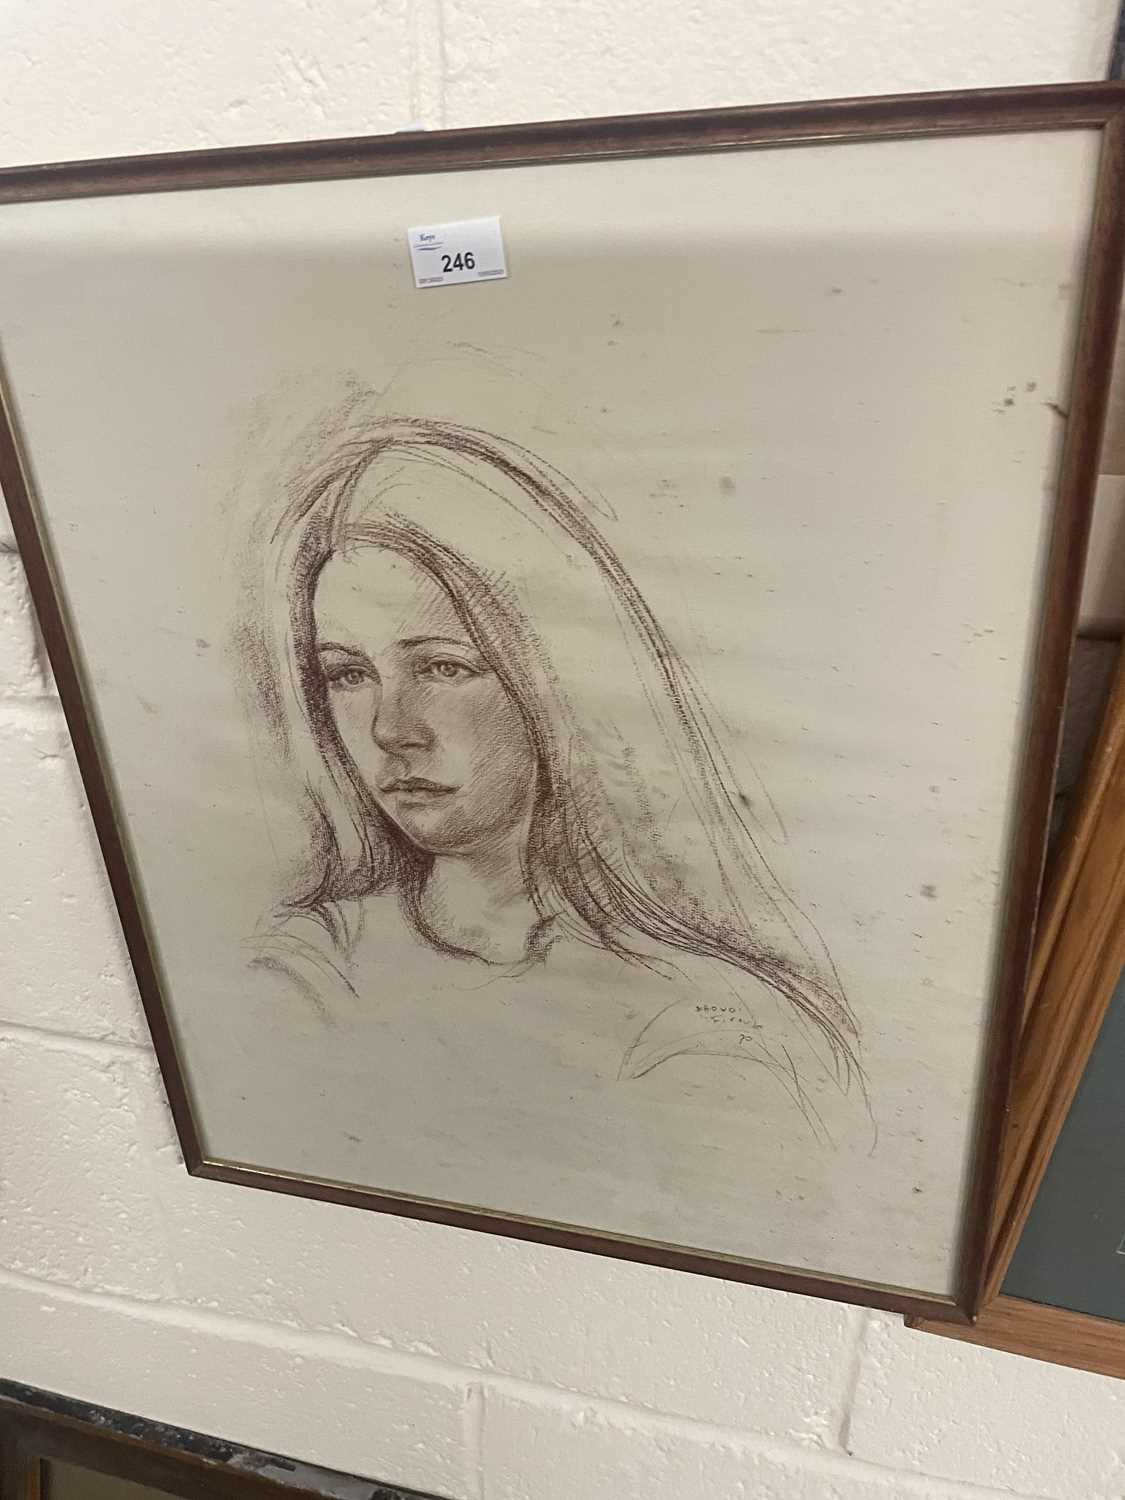 Pastel portrait of a young woman with long hair by David Thurl possibly dated 80?, frame and glazed